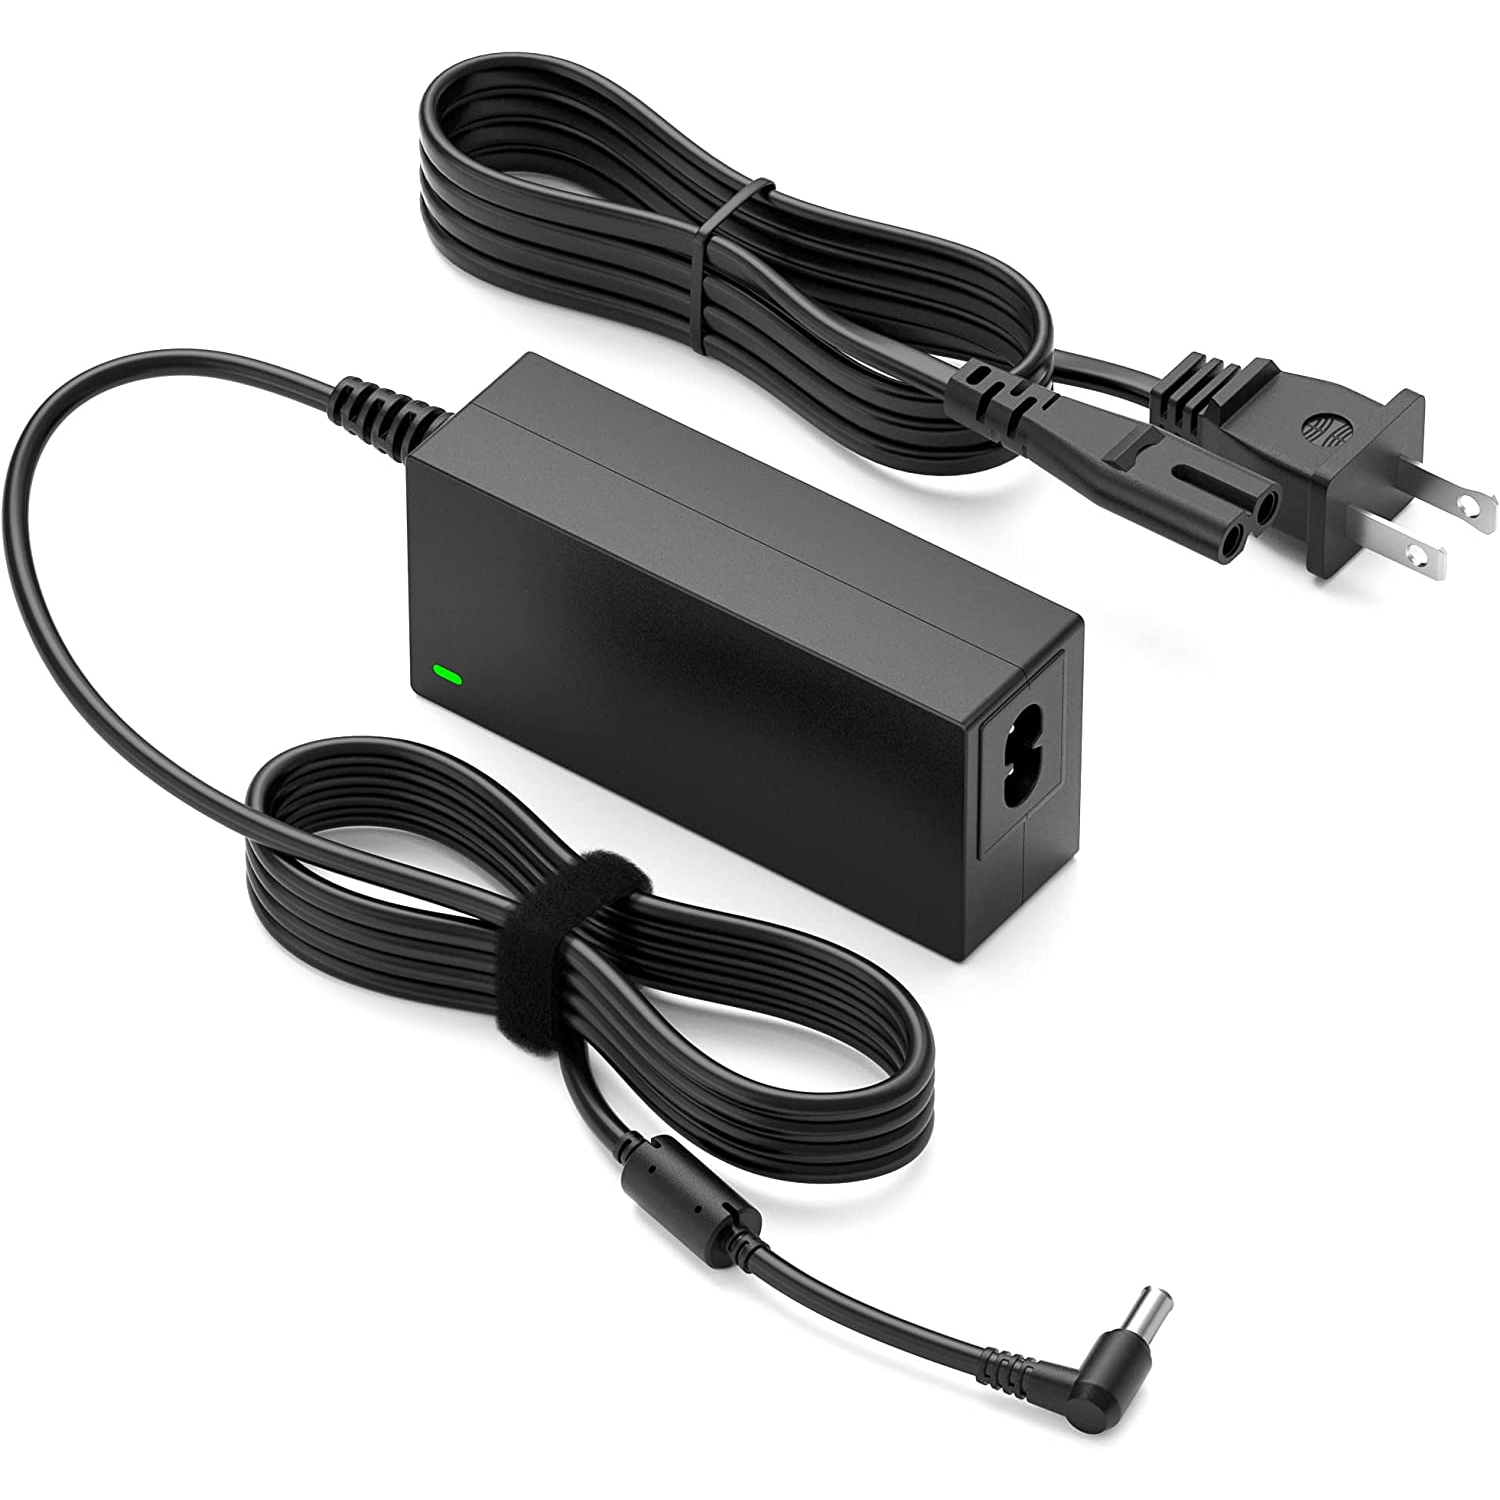 14V AC/DC Adapter for Samsung Monitor 14V 3A 2.5A 2.14A 1.78A Power Supply Cord Charger for Samsung SyncMaster